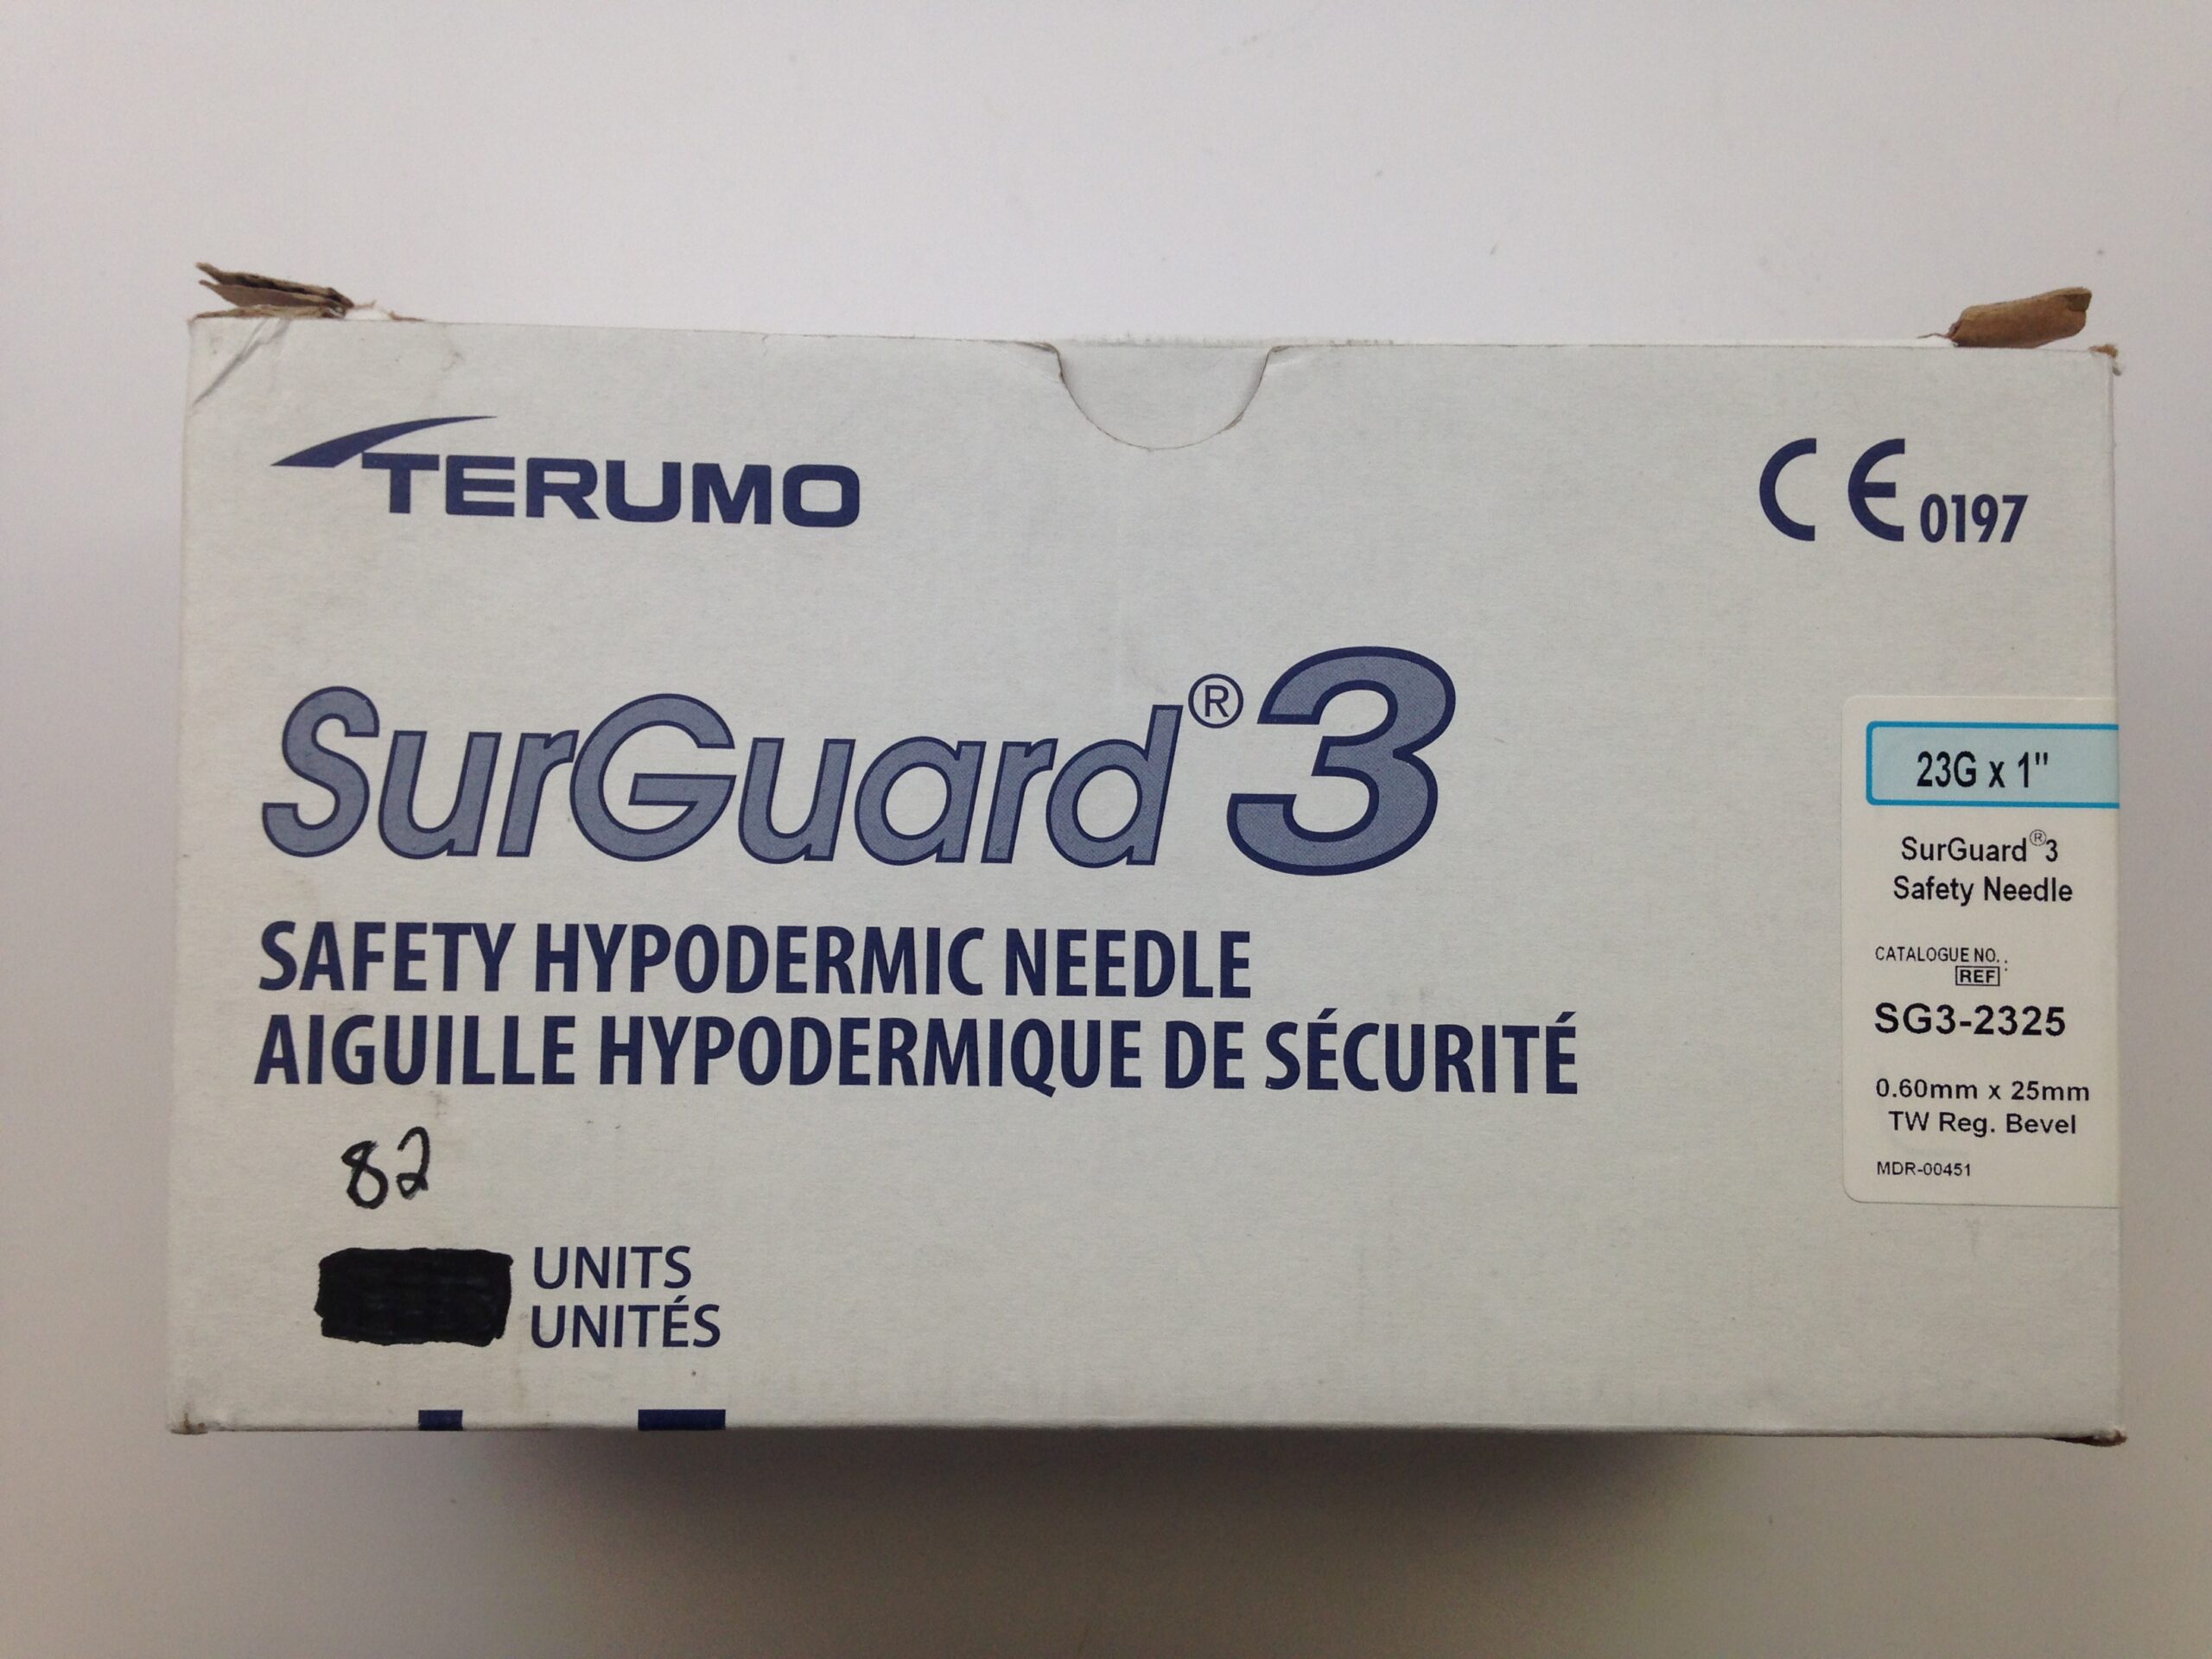 Terumo Syringes with SurGuard3 25G Safety Hypodermic Needles:First Aid